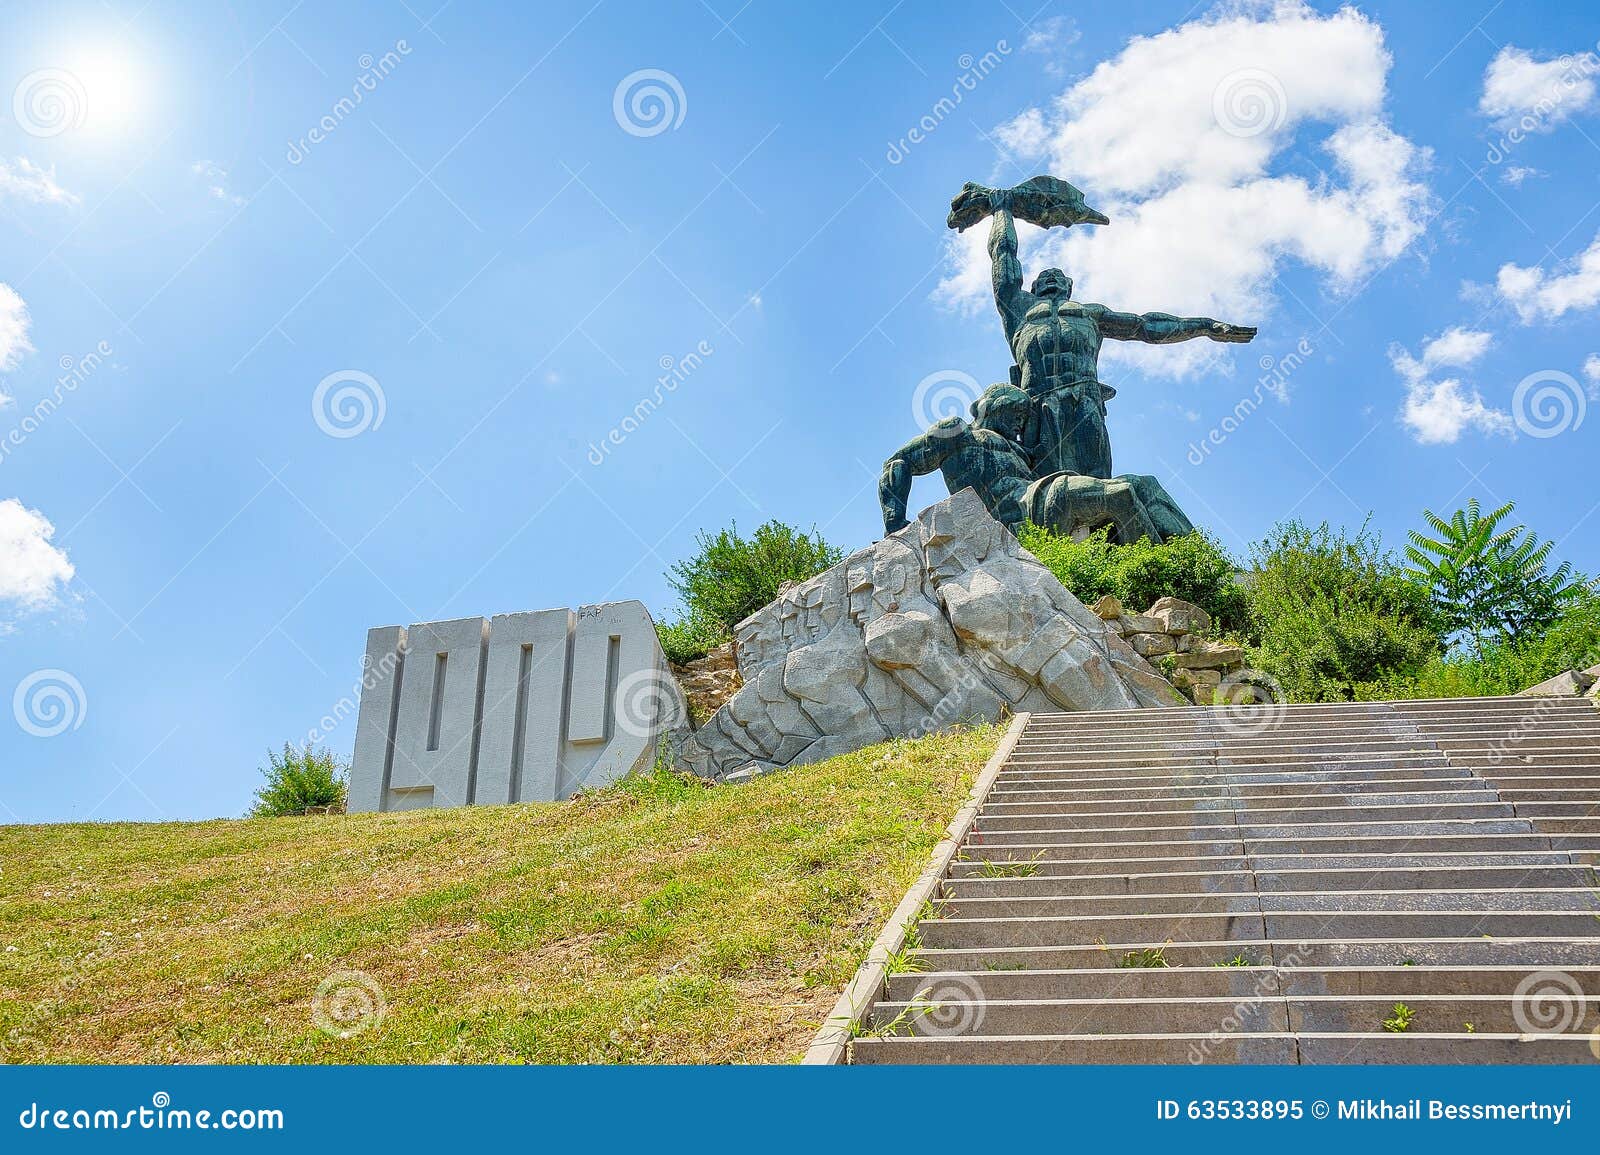 the monument to the uprising of the workers